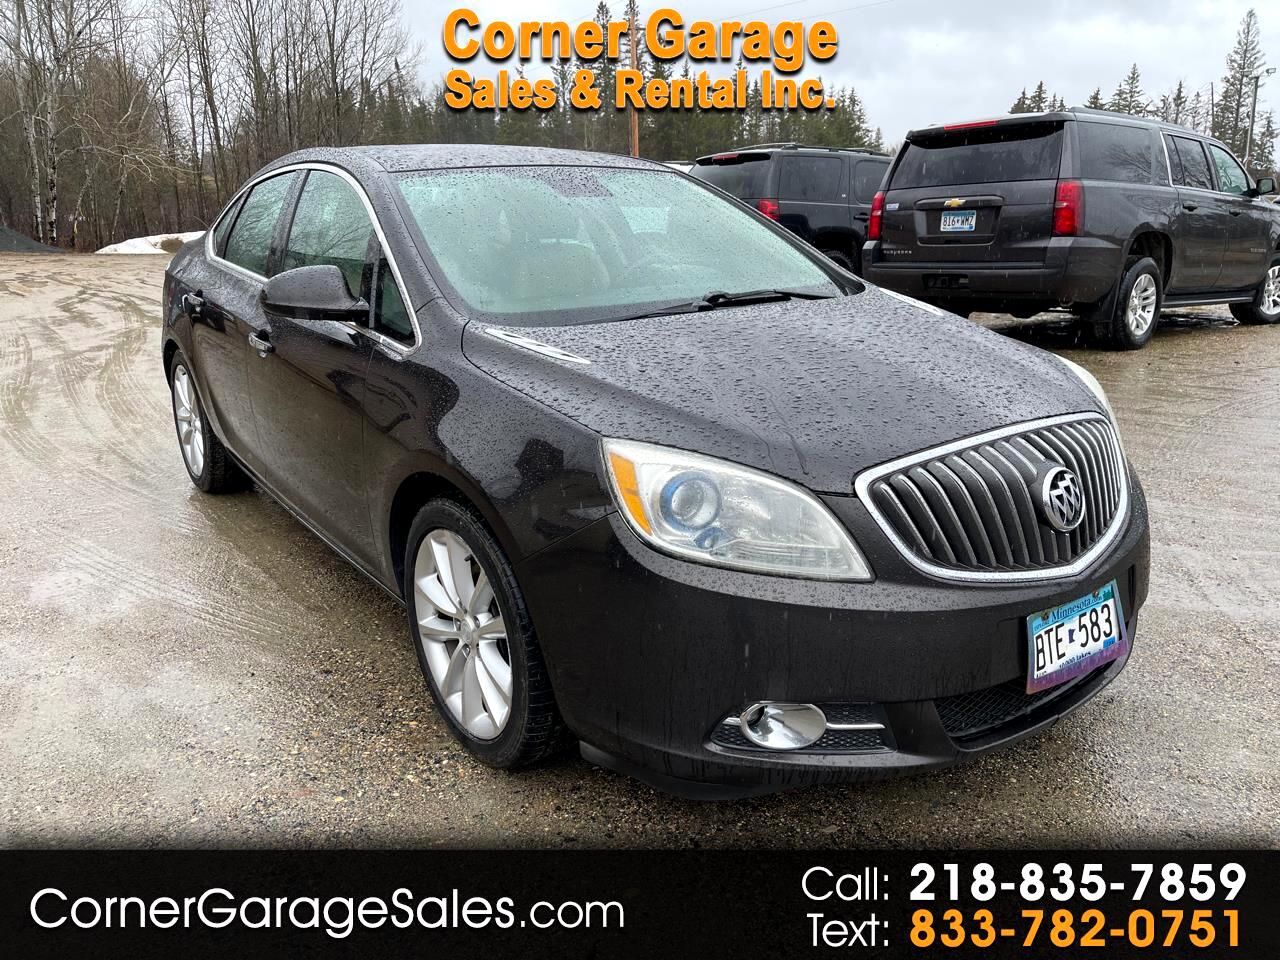 2013 Buick Verano 4dr Sdn Leather Group